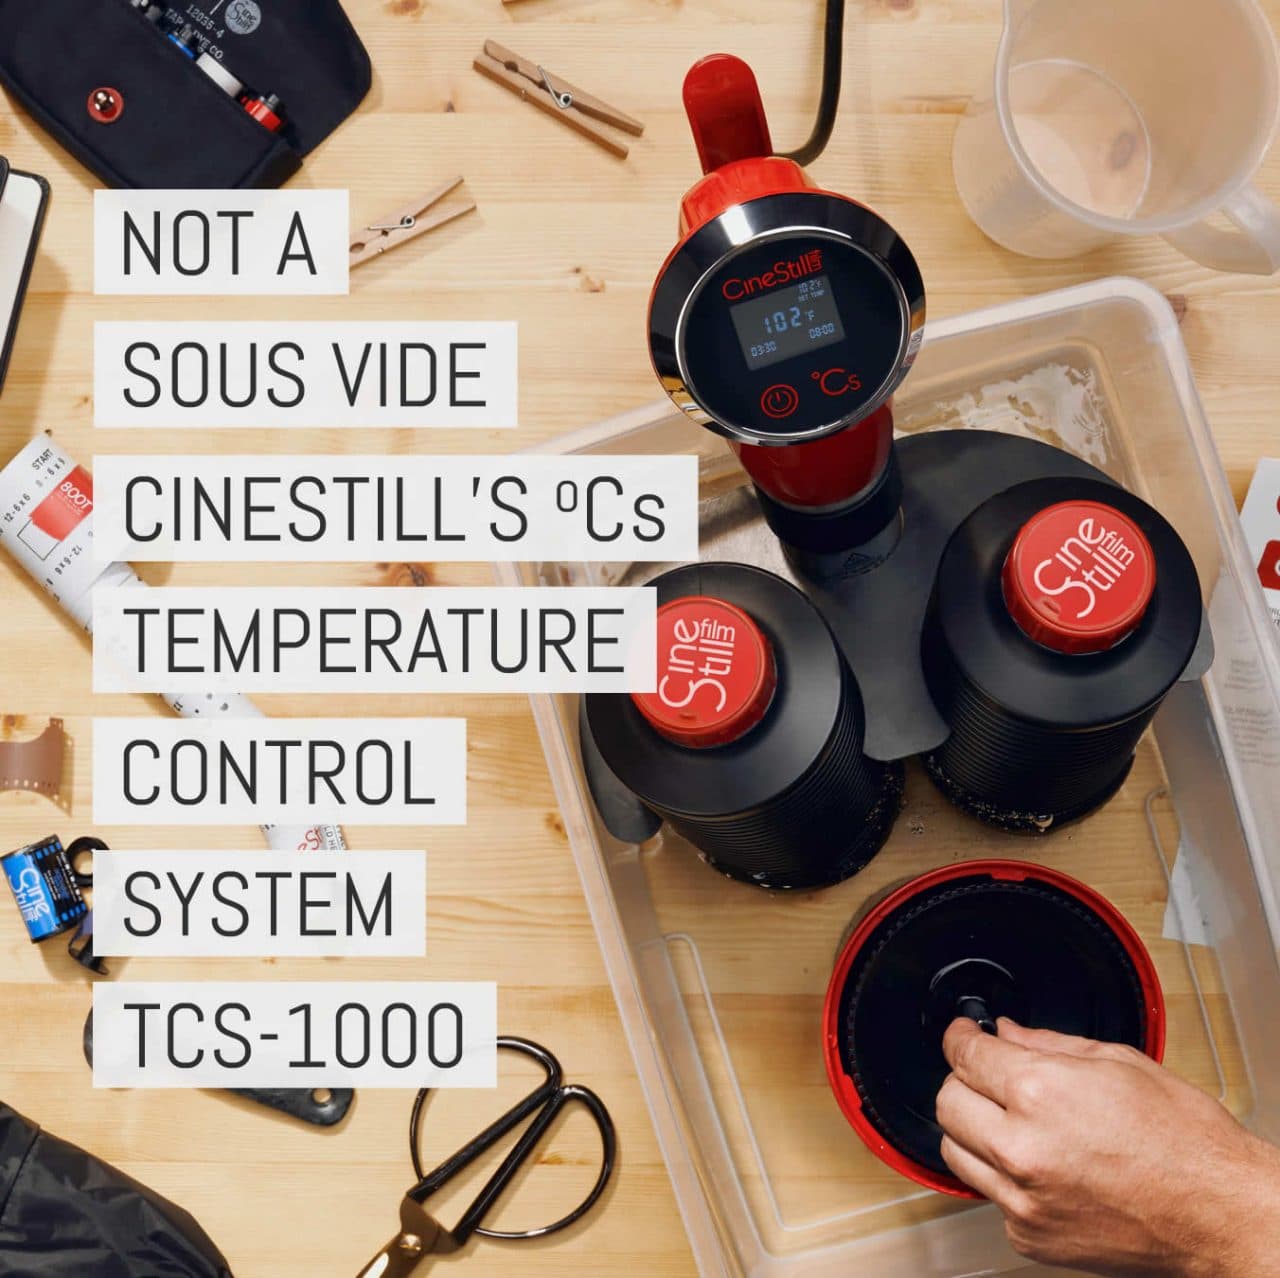 Not a sous vide cooker: Cinestill’s ºCs “Temperature Control System” TCS-1000 is a useful tool for simple film development at home